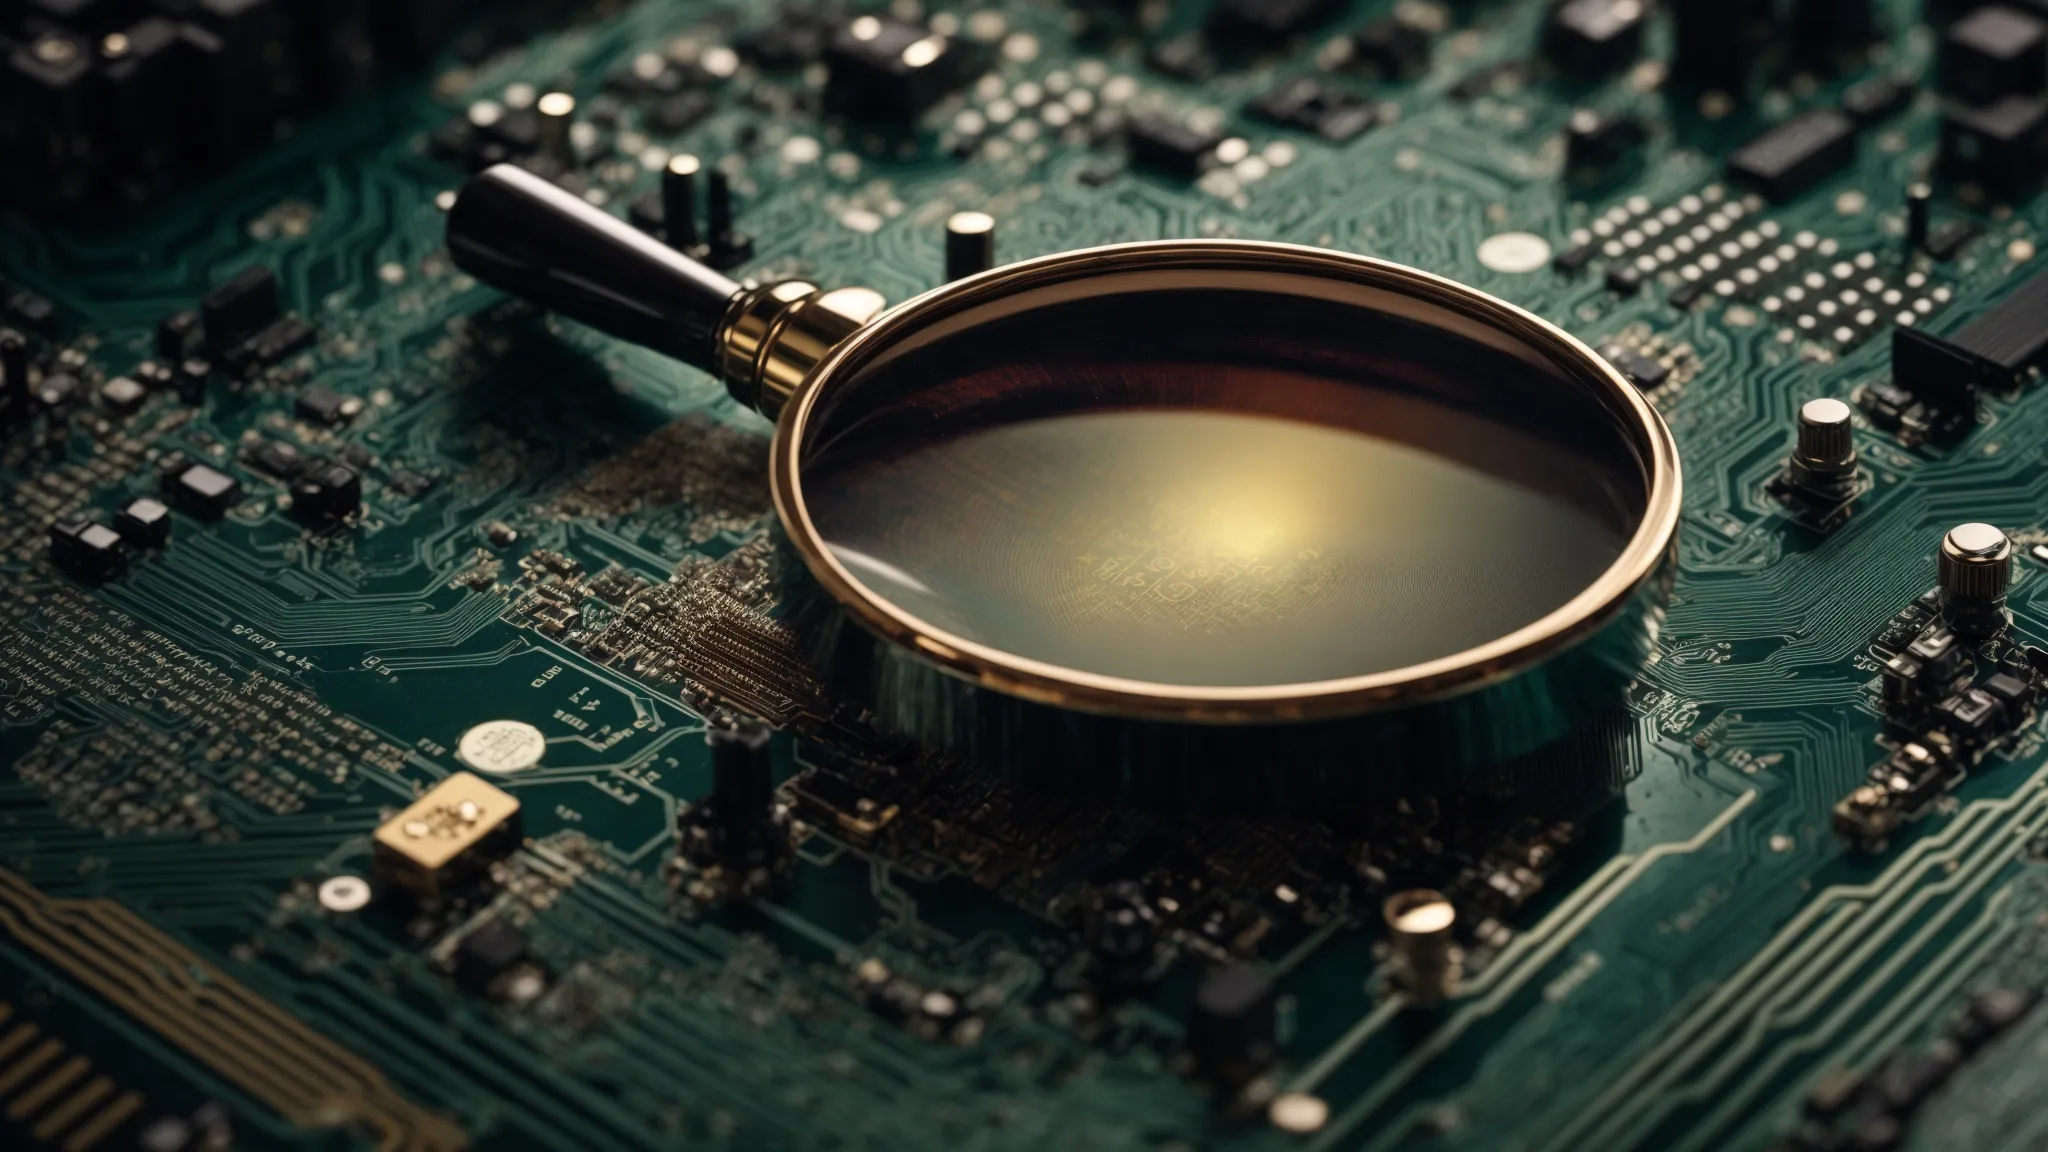 a close-up of a magnifying glass hovering over a complex circuit board, symbolizing the analytical aspect of technical seo.